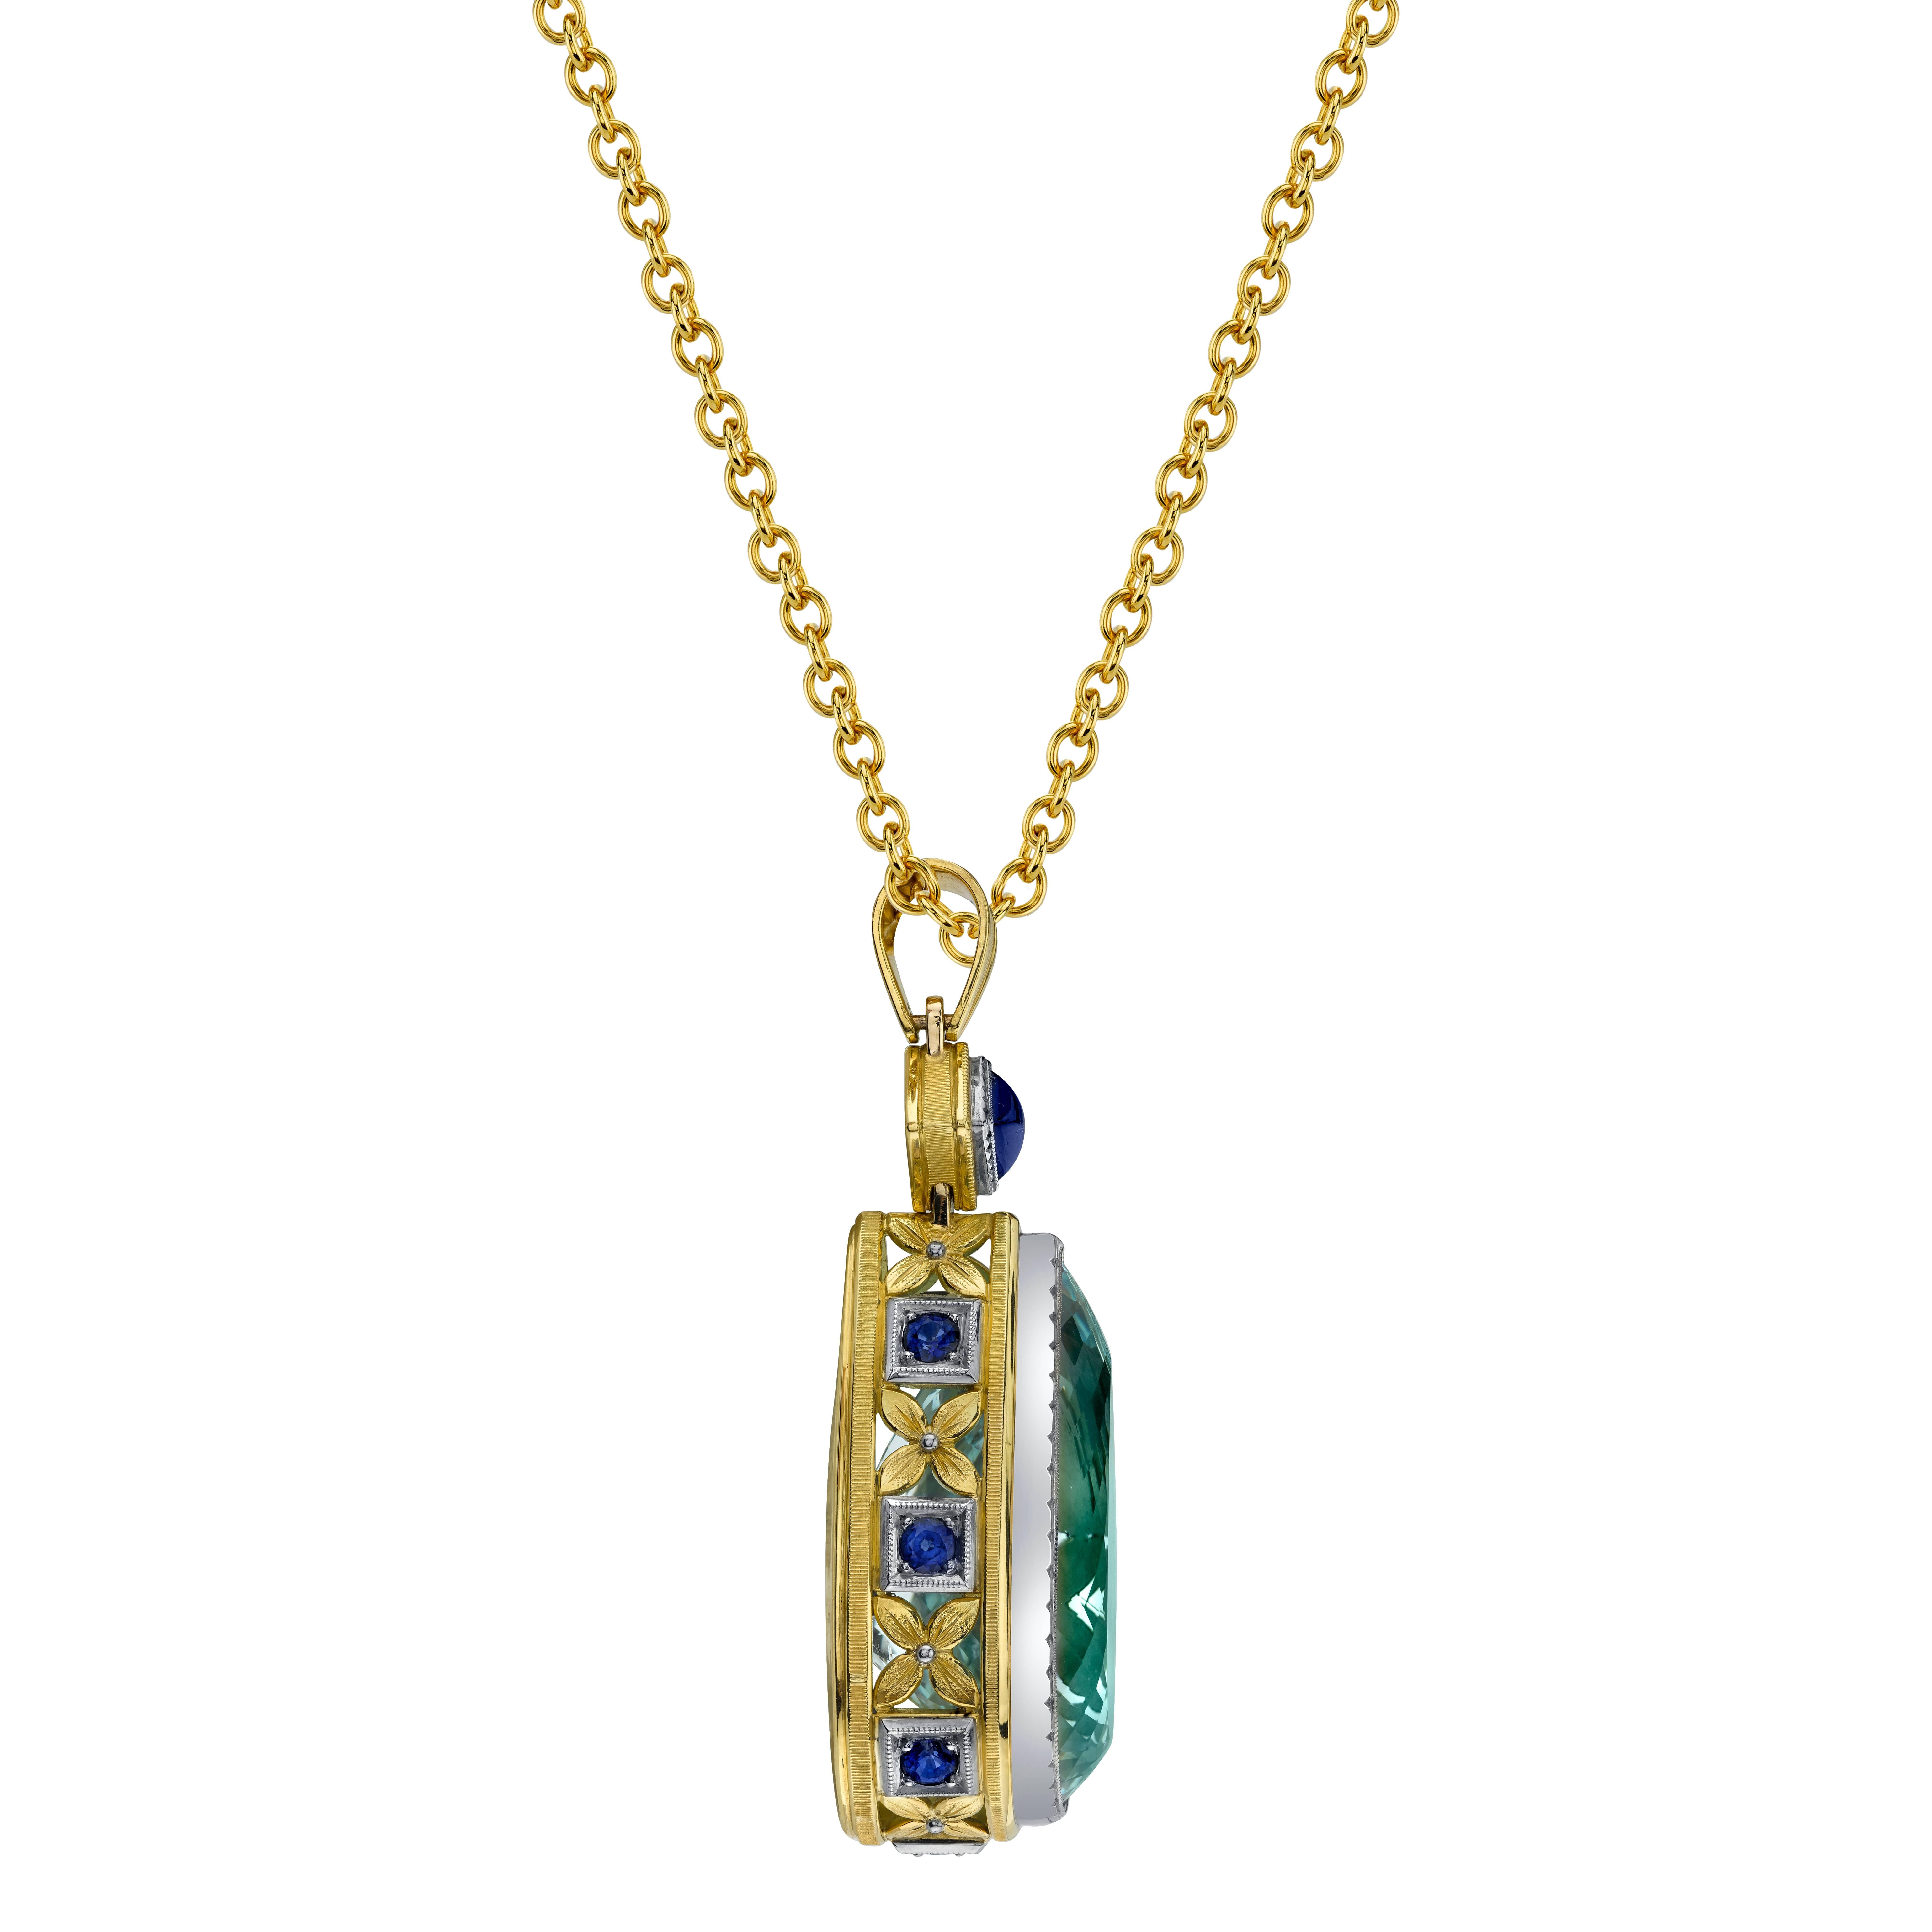 This impressive handmade pendant features a stunning pear shaped aquamarine set with sparkling blue sapphires in a gorgeous, one-of-a-kind work of art! The aquamarine is a brilliant gem weighing 54.95 carats, beautifully faceted, crystalline clear